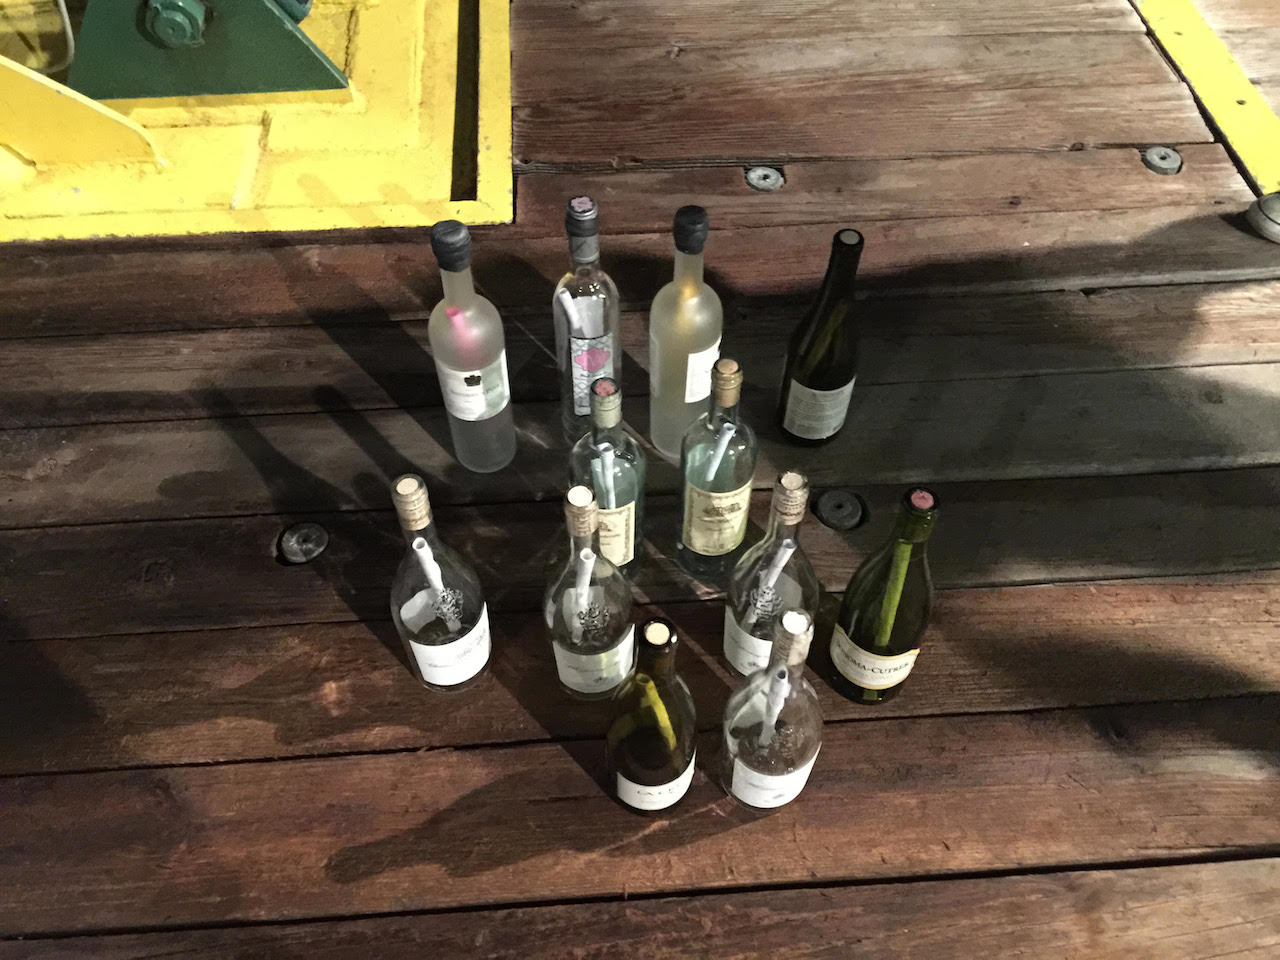 Messages in bottles on the deck of the F.G. Walton Smith awaiting deployment. Image credit: NOAA